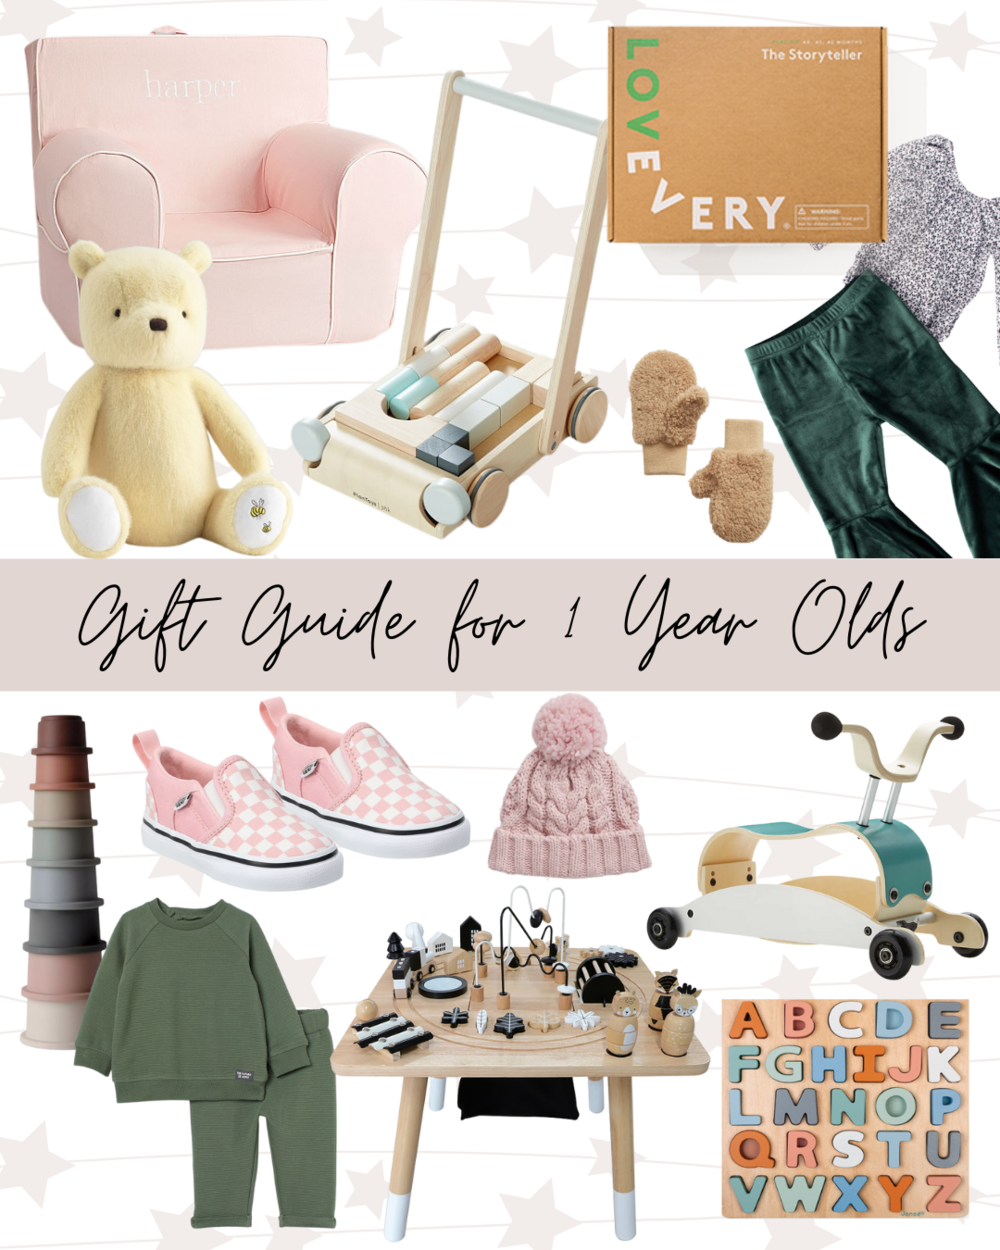 For Her Trending Gift Guide 2022 - Being Summer Shores